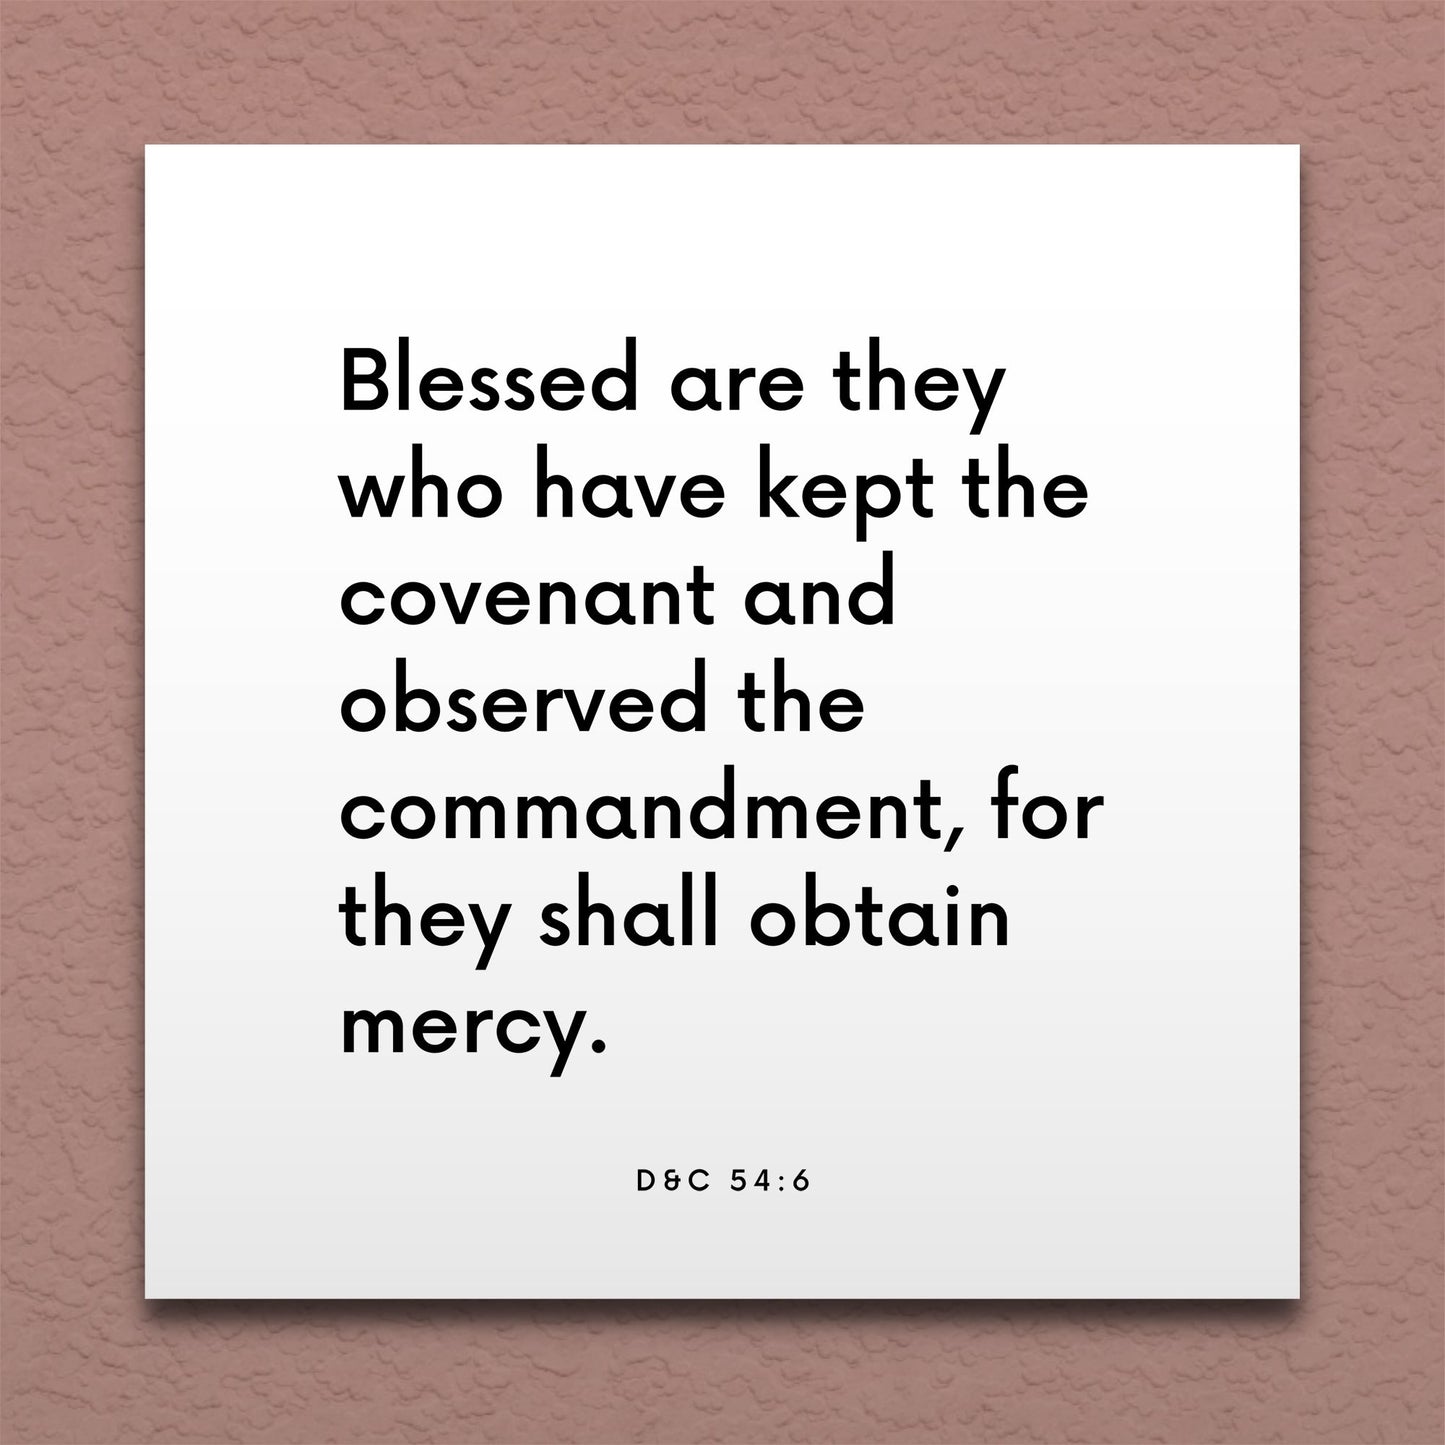 Wall-mounted scripture tile for D&C 54:6 - "Blessed are they who have kept the covenant"